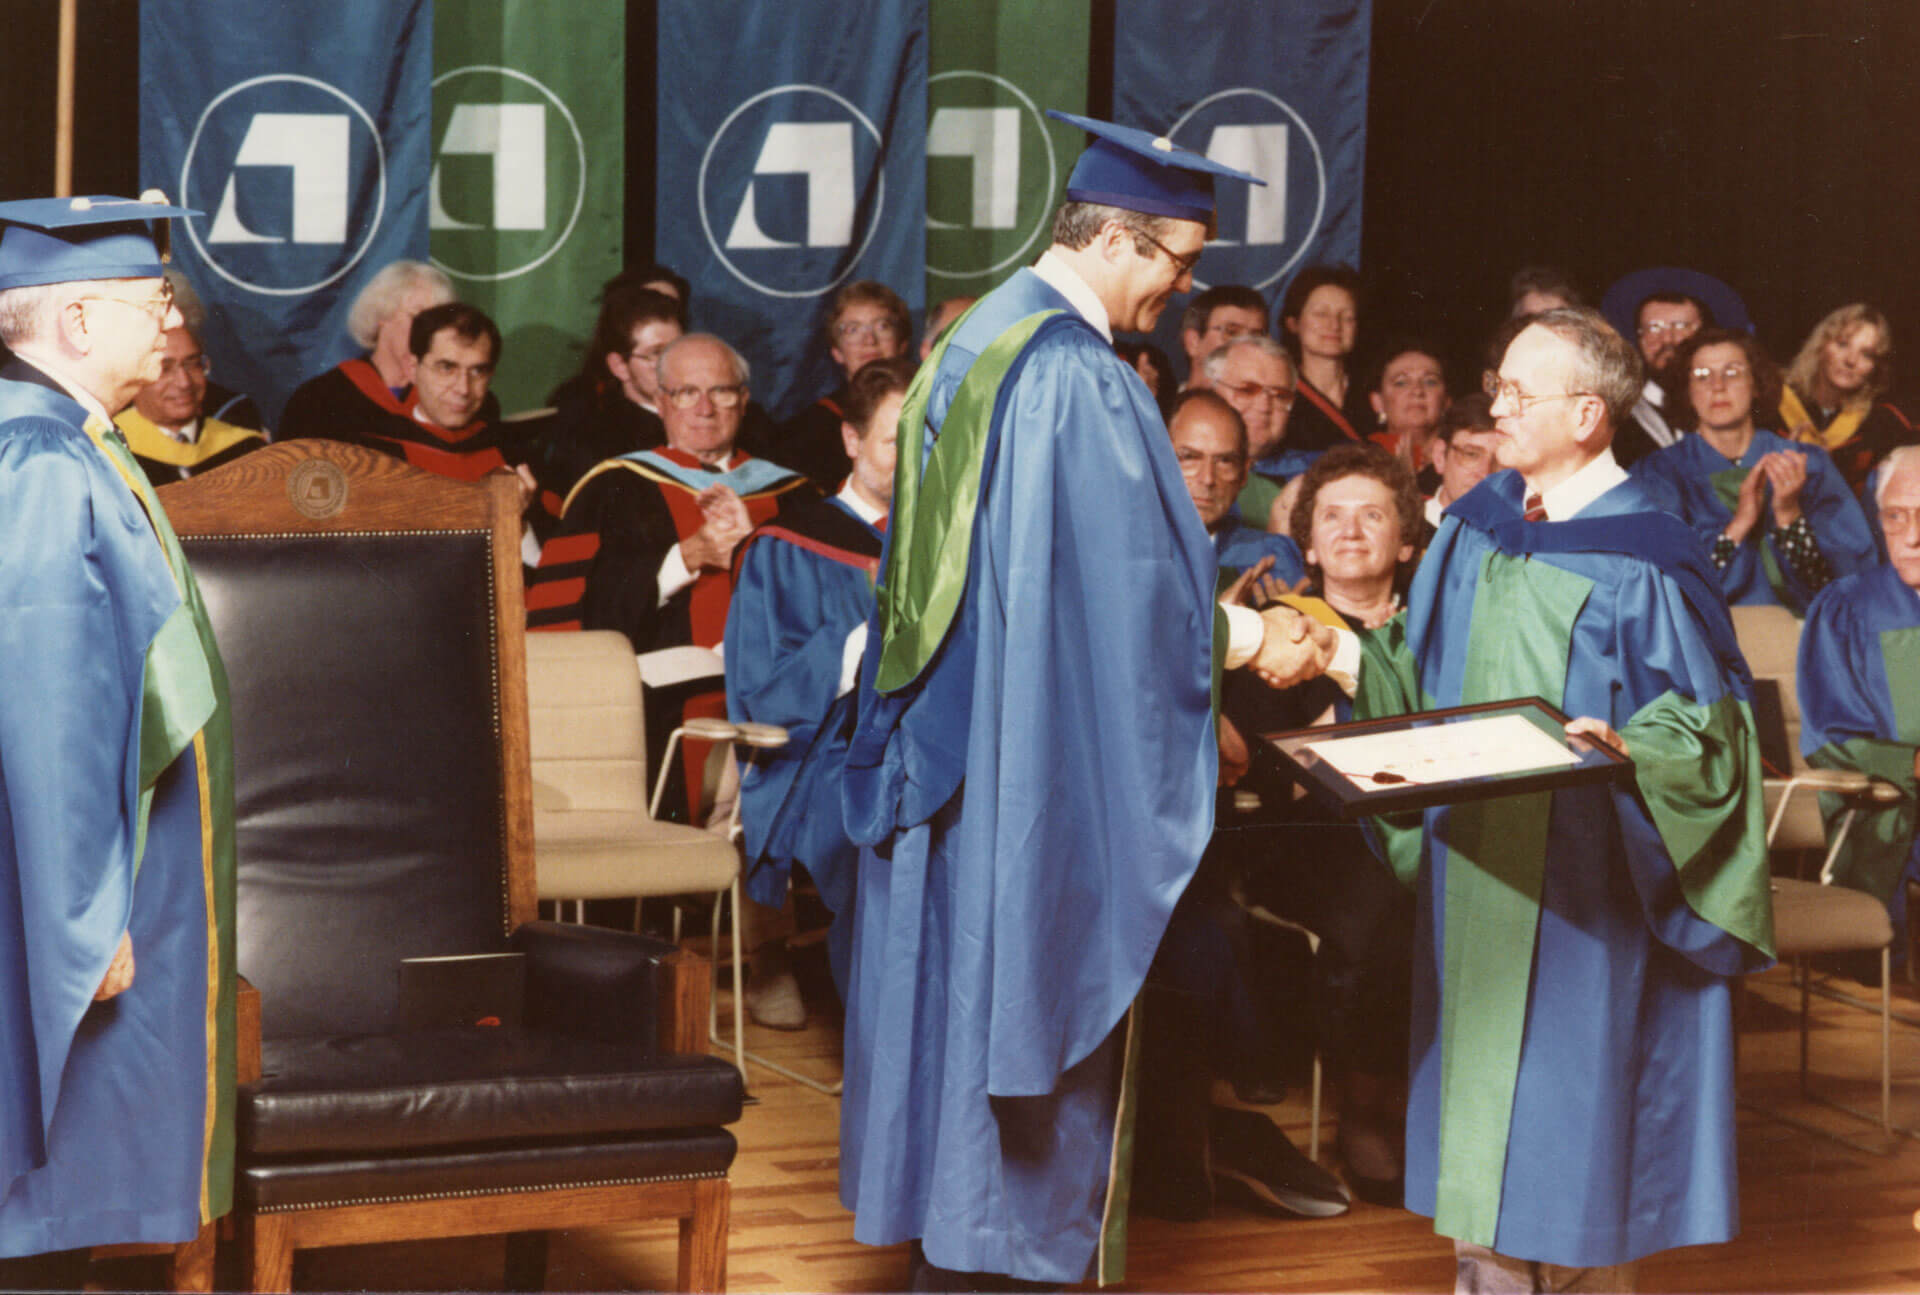 Image of graduate recieiving degree. AU’s founding colours were blue and green, as shown here in this photo circa 1984. Though AU’s brand colours are orange and dark blue currently, the original blue and green can still be seen on AU’s coat of arms. The colours reference AU’s connection to central and northern Alberta.